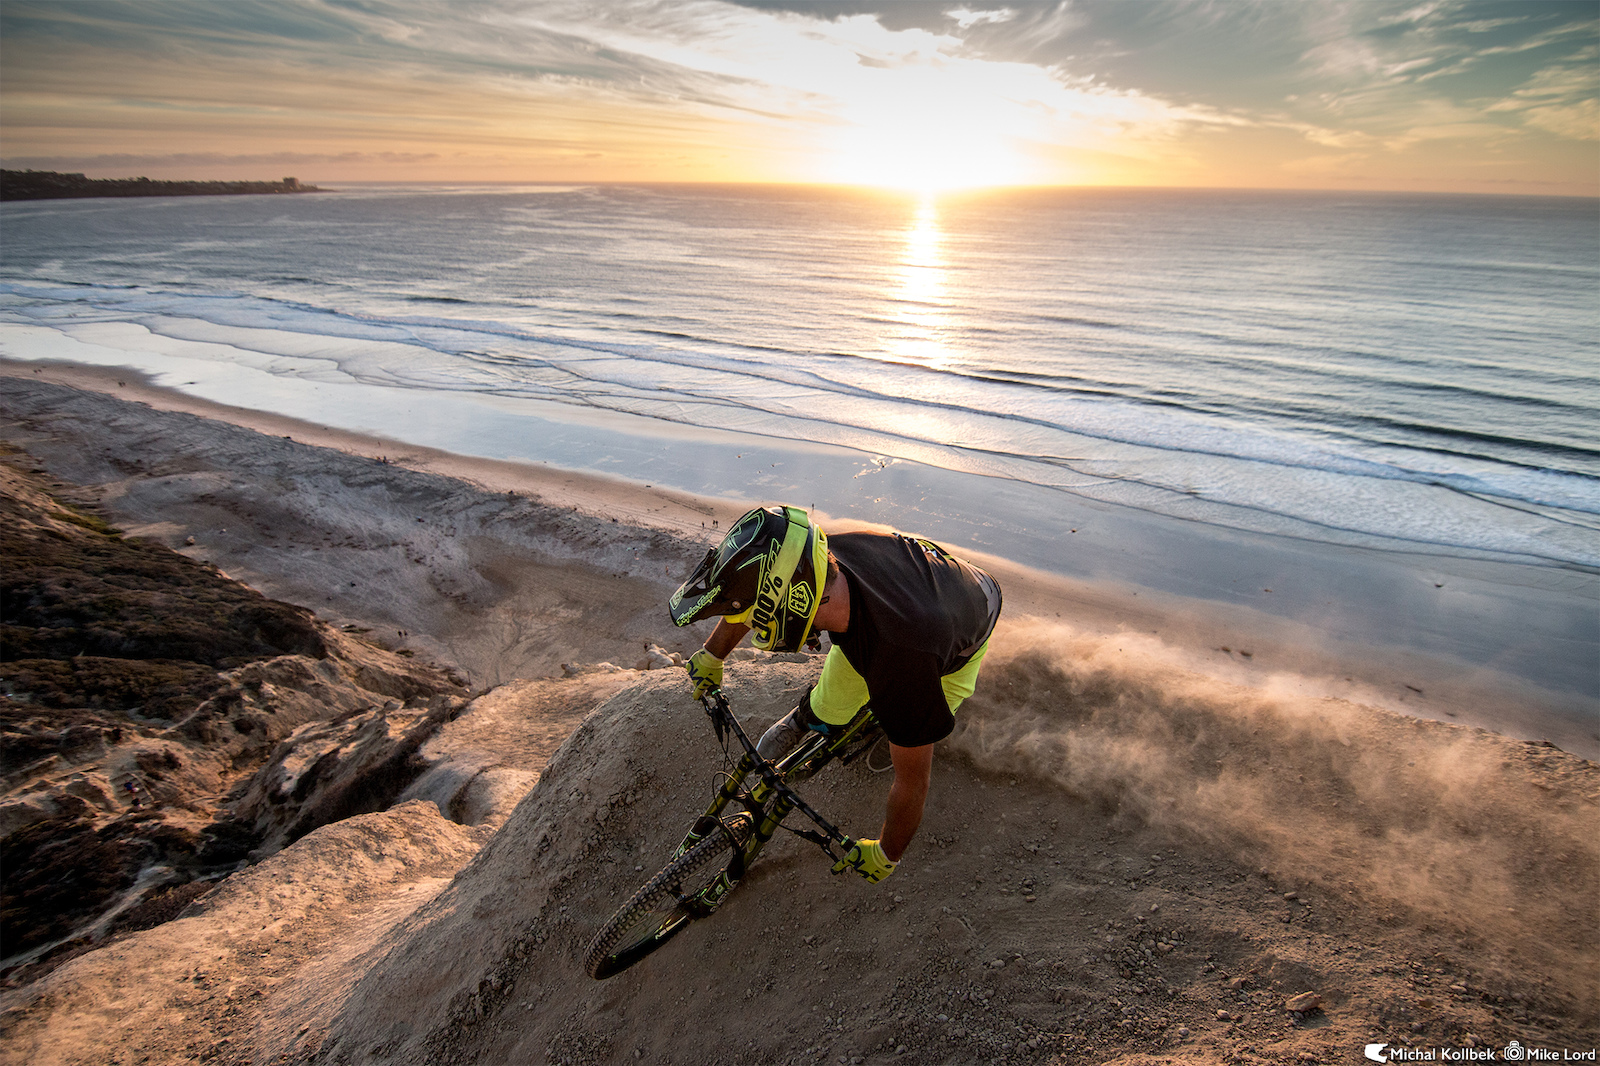 DVO Suspension Team Rider Michal Kollbek getting the last bit of light while taking in the amazing California winter sunset. It was a great day of shooting!

Follow us on Instagram!
@kollbi - Rider
@energyjunkie - Photographer